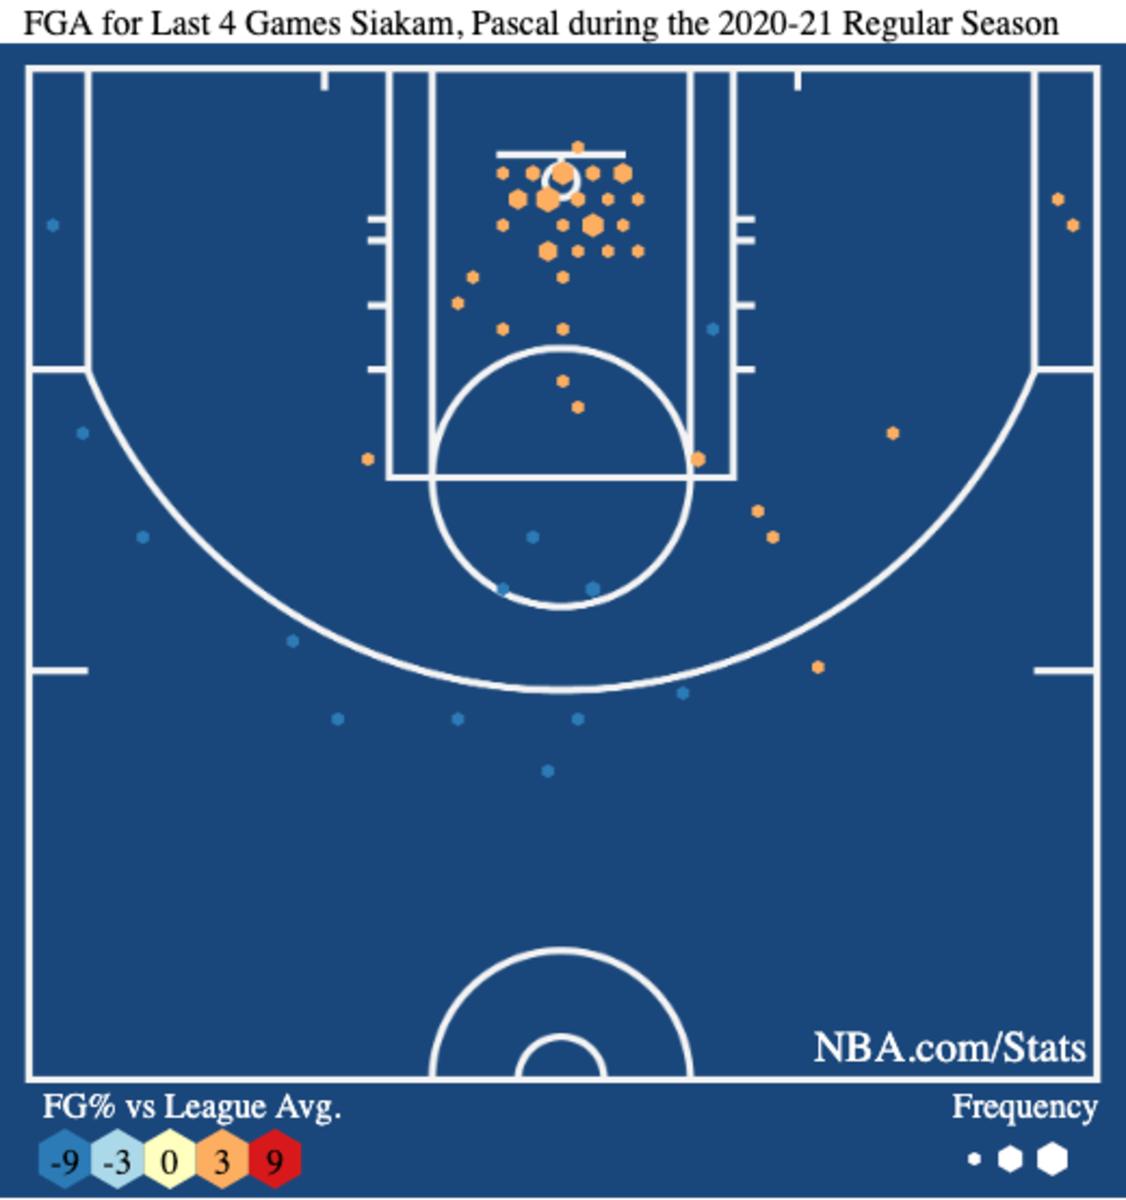 Pascal Siakam's shot chart over the last four games